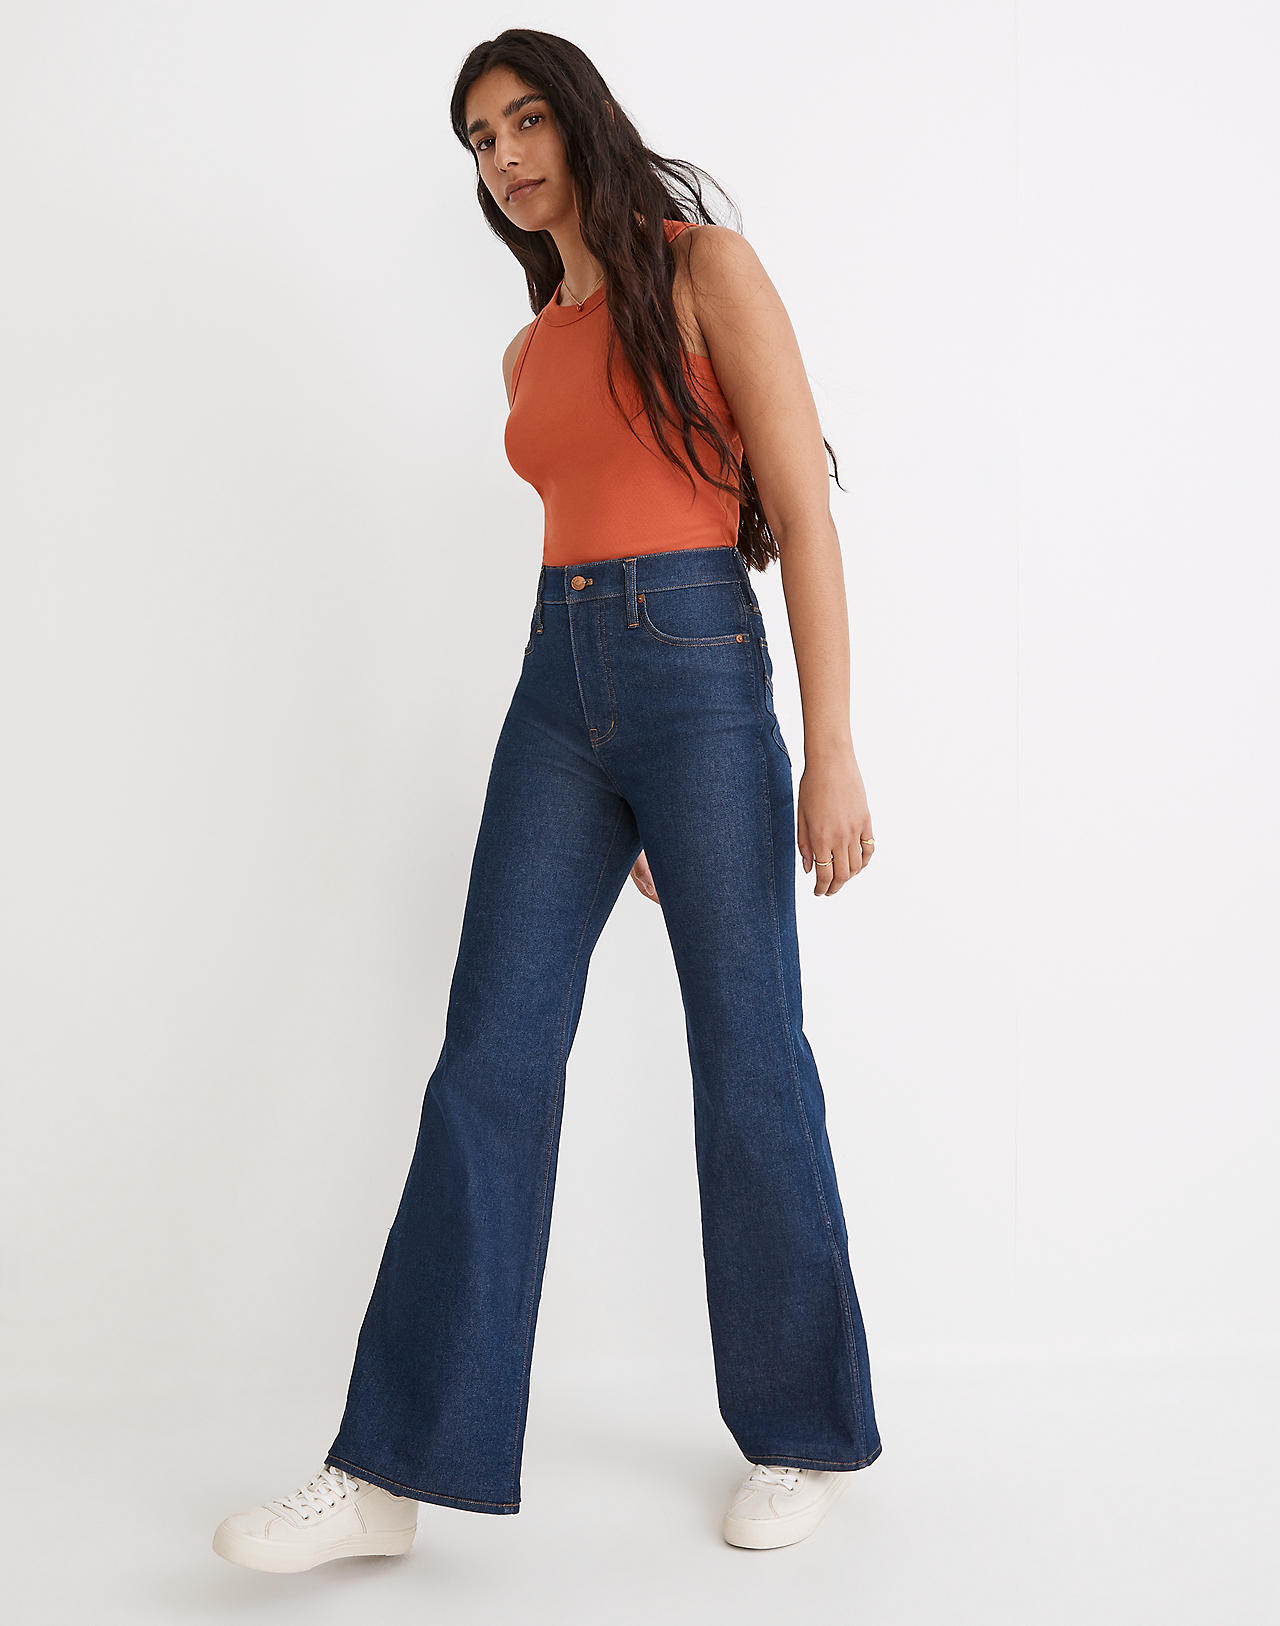 High-Rise Flare Jeans in Wrenford Wash